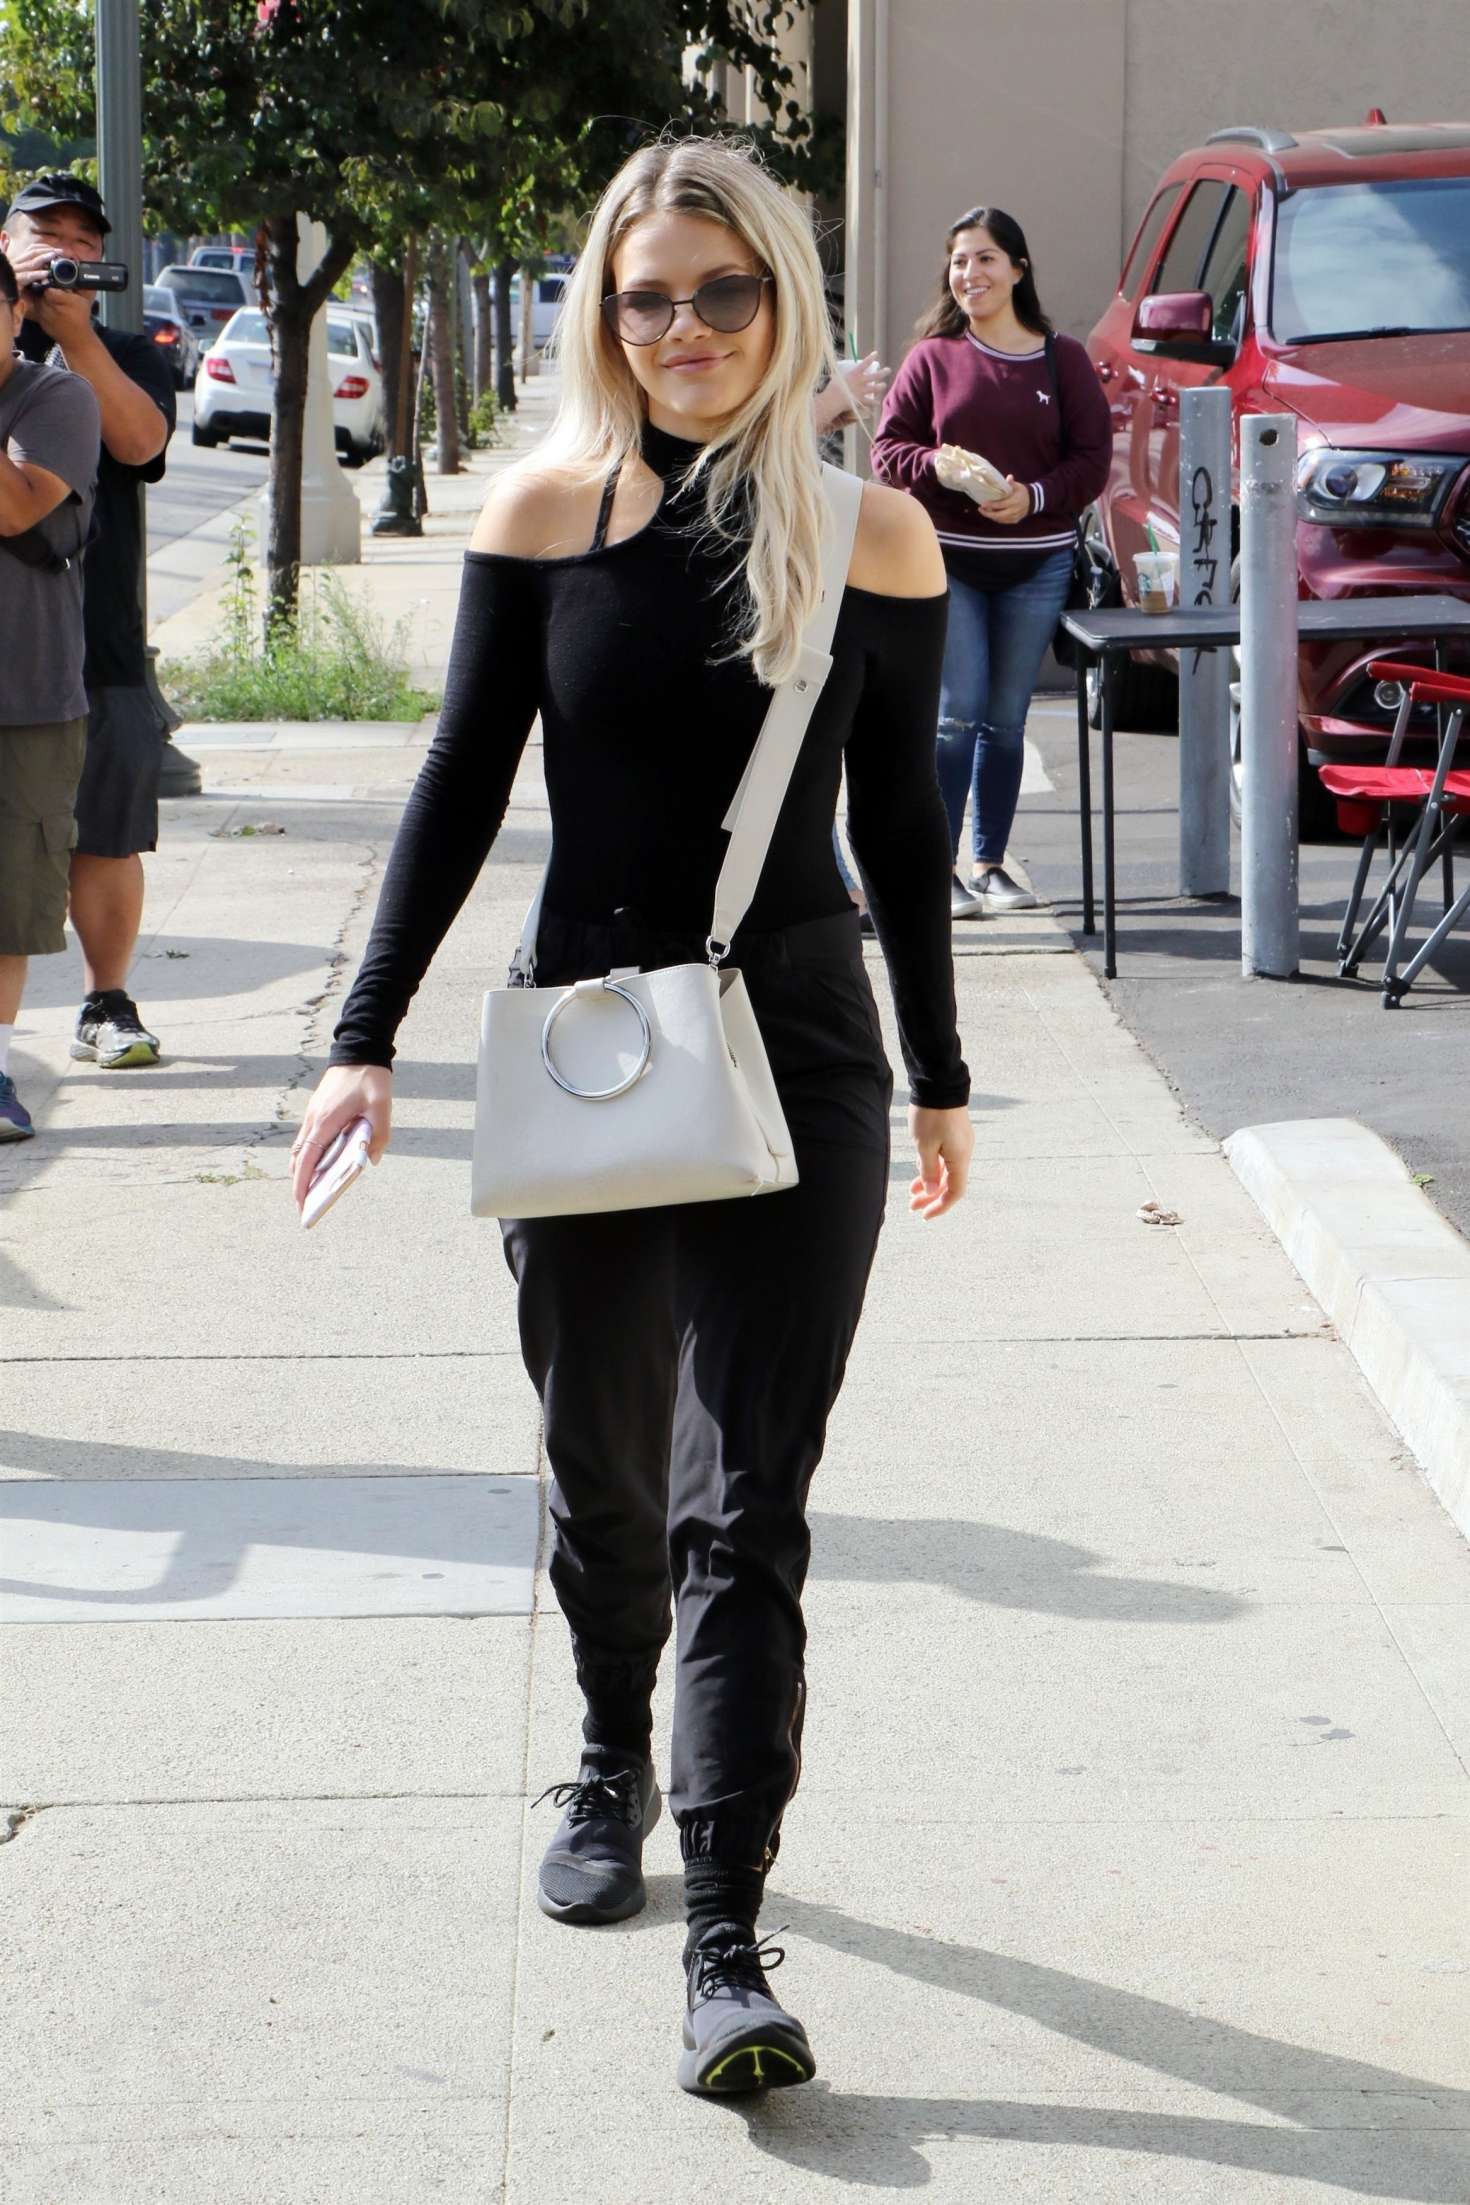 Witney Carson at the DWTS studio in Los Angeles